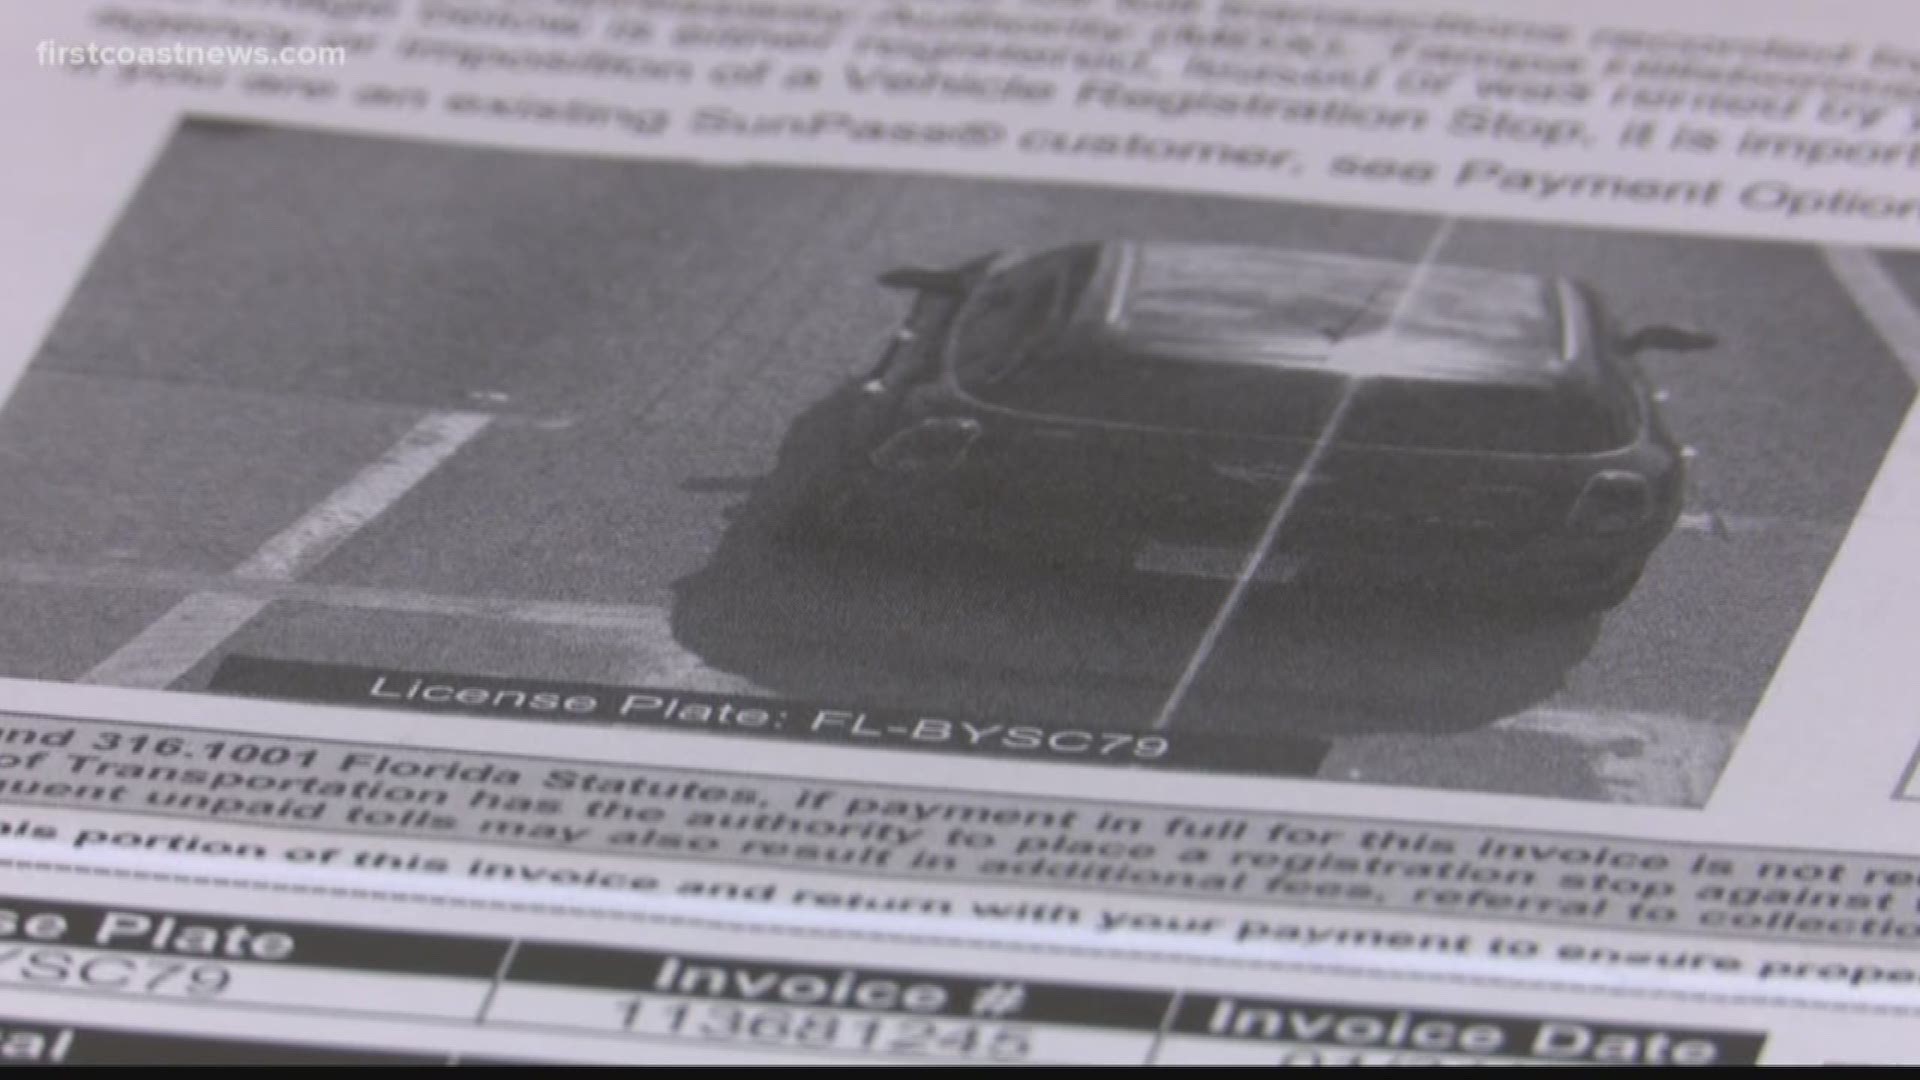 Drivers who have not gotten FDOT disputes solved could face issues renewing their license.